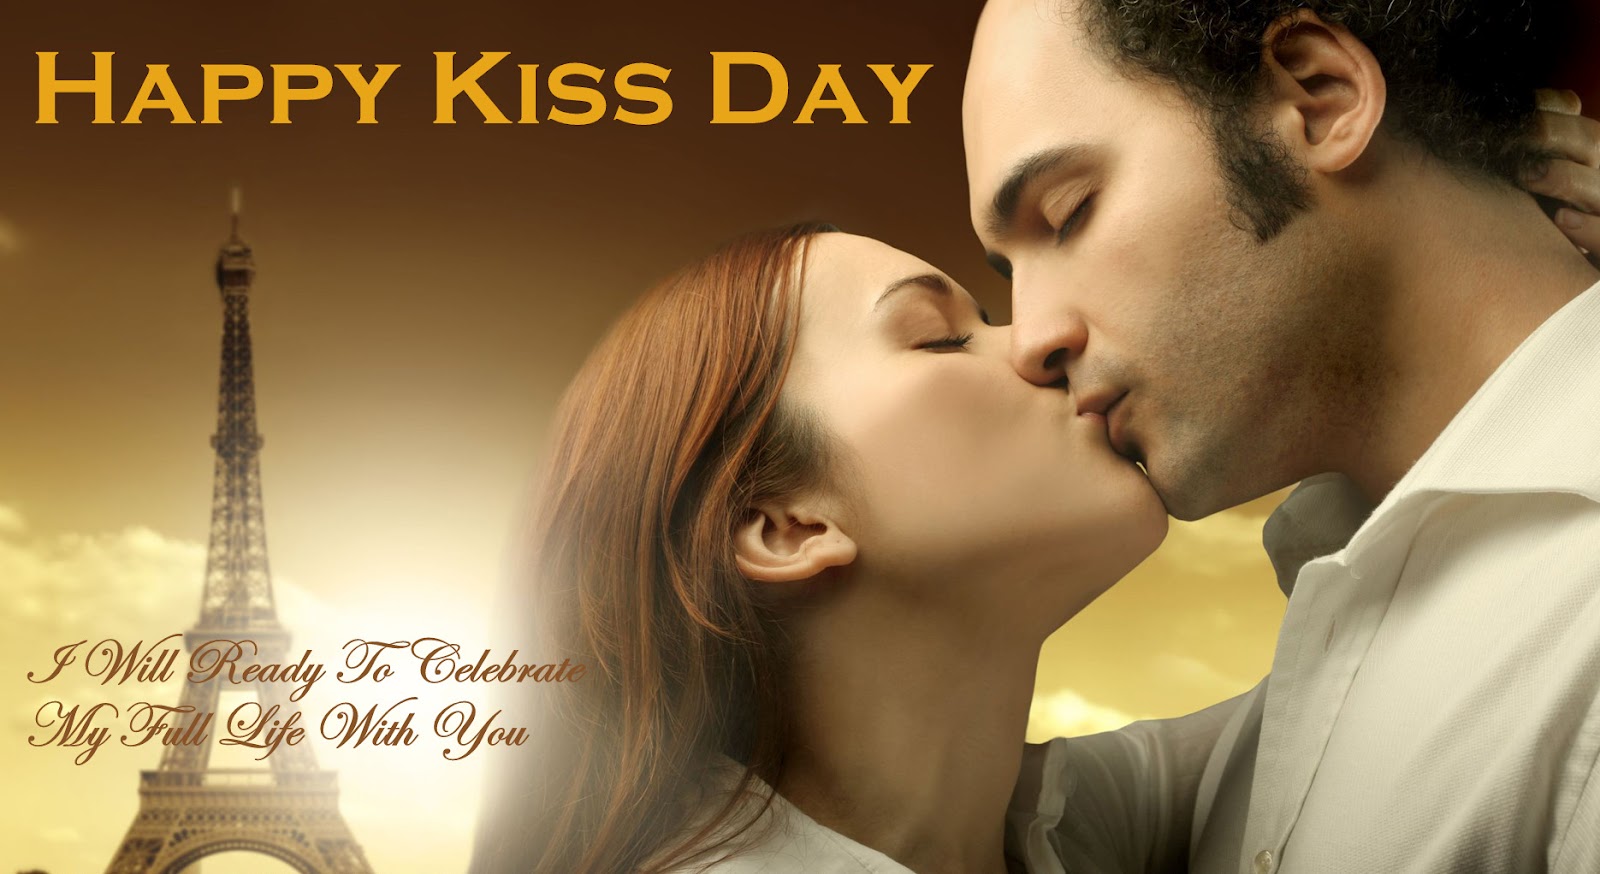 Happy Kiss Day Wishes - 13 February 2023 | Download Pics, Images ...